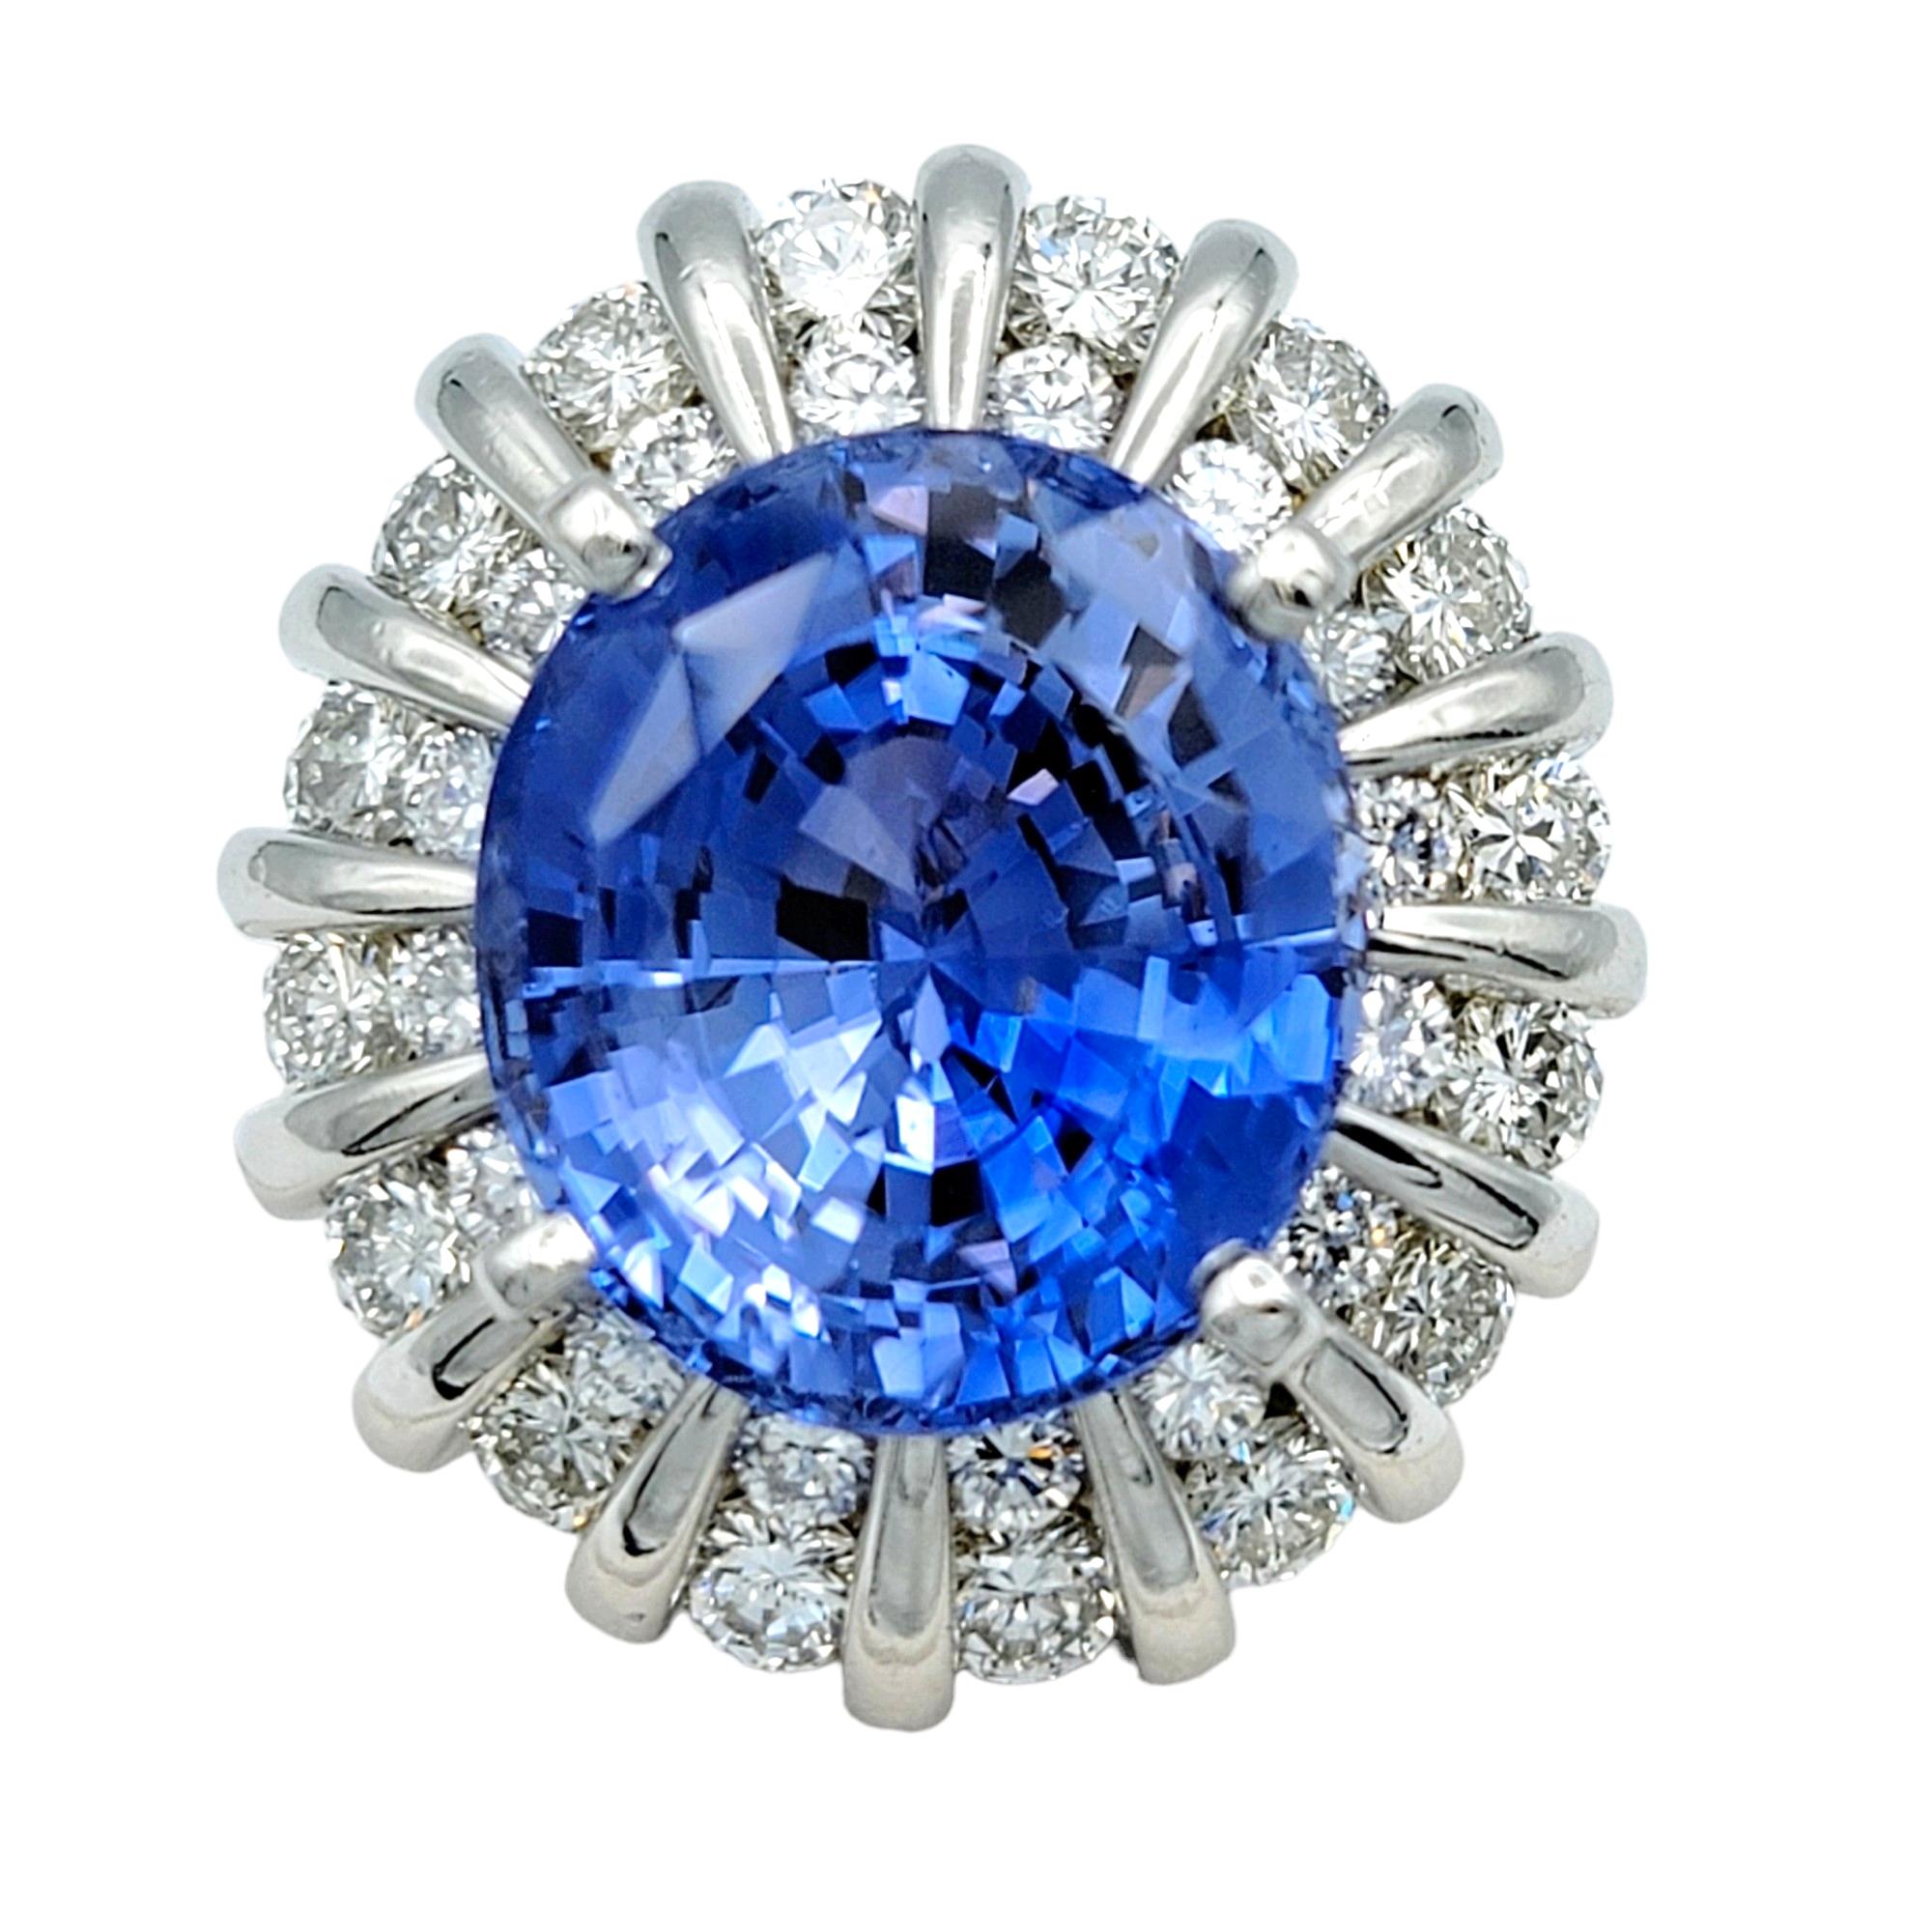 Contemporary Rare Untreated 16.27 Carat Oval Cut Ceylon Sapphire and Double Diamond Halo Ring For Sale